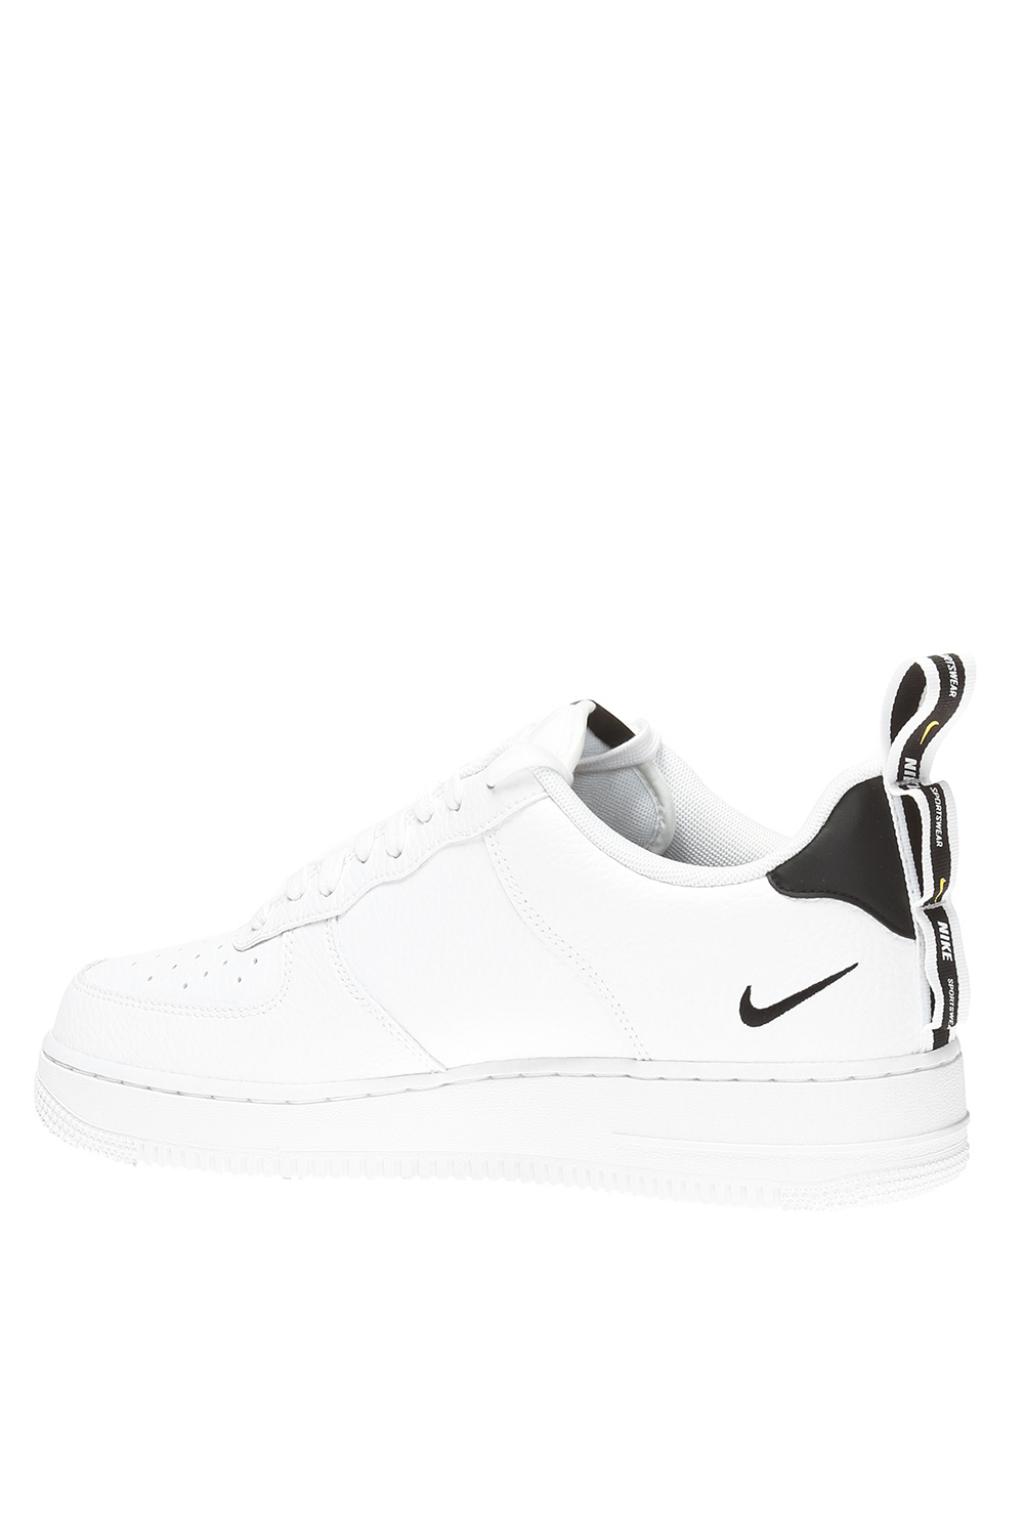 Clothing Shoes and Accessories 158963: Nike Air Force 1 07 Lv8 Utility  Black White Mens Shoes Af1 Sneakers Pick 1 -> B…